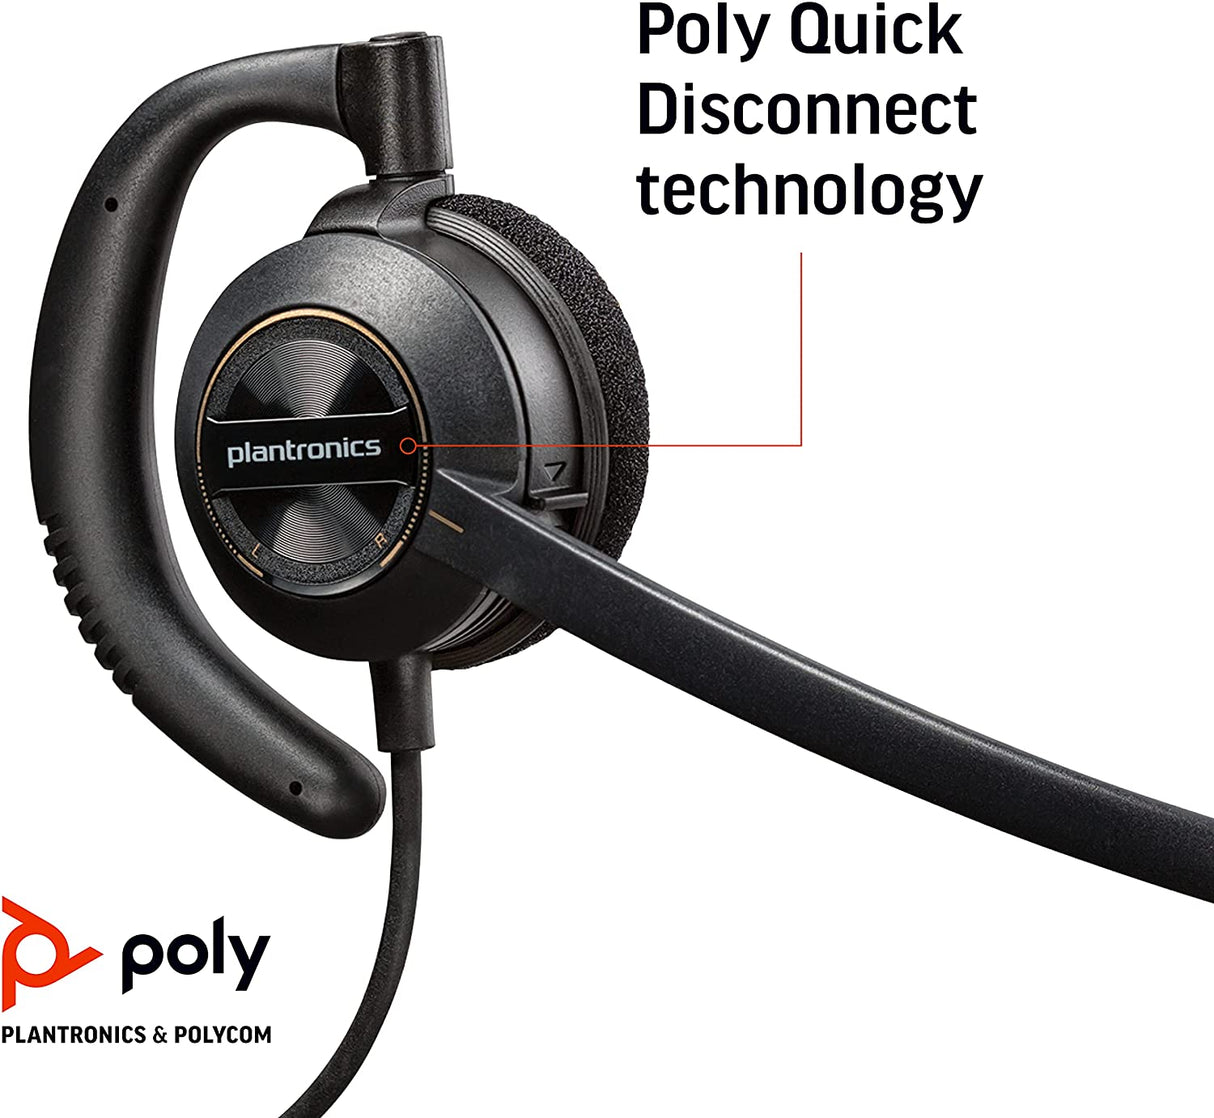 Poly - EncorePro 530 Quick Disconnect (QD) Headset (Plantronics) - Works with Poly Call Center Digital Adapters (Sold Separately) - Acoustic Hearing Protection - Over-the-Ear Wearing Style